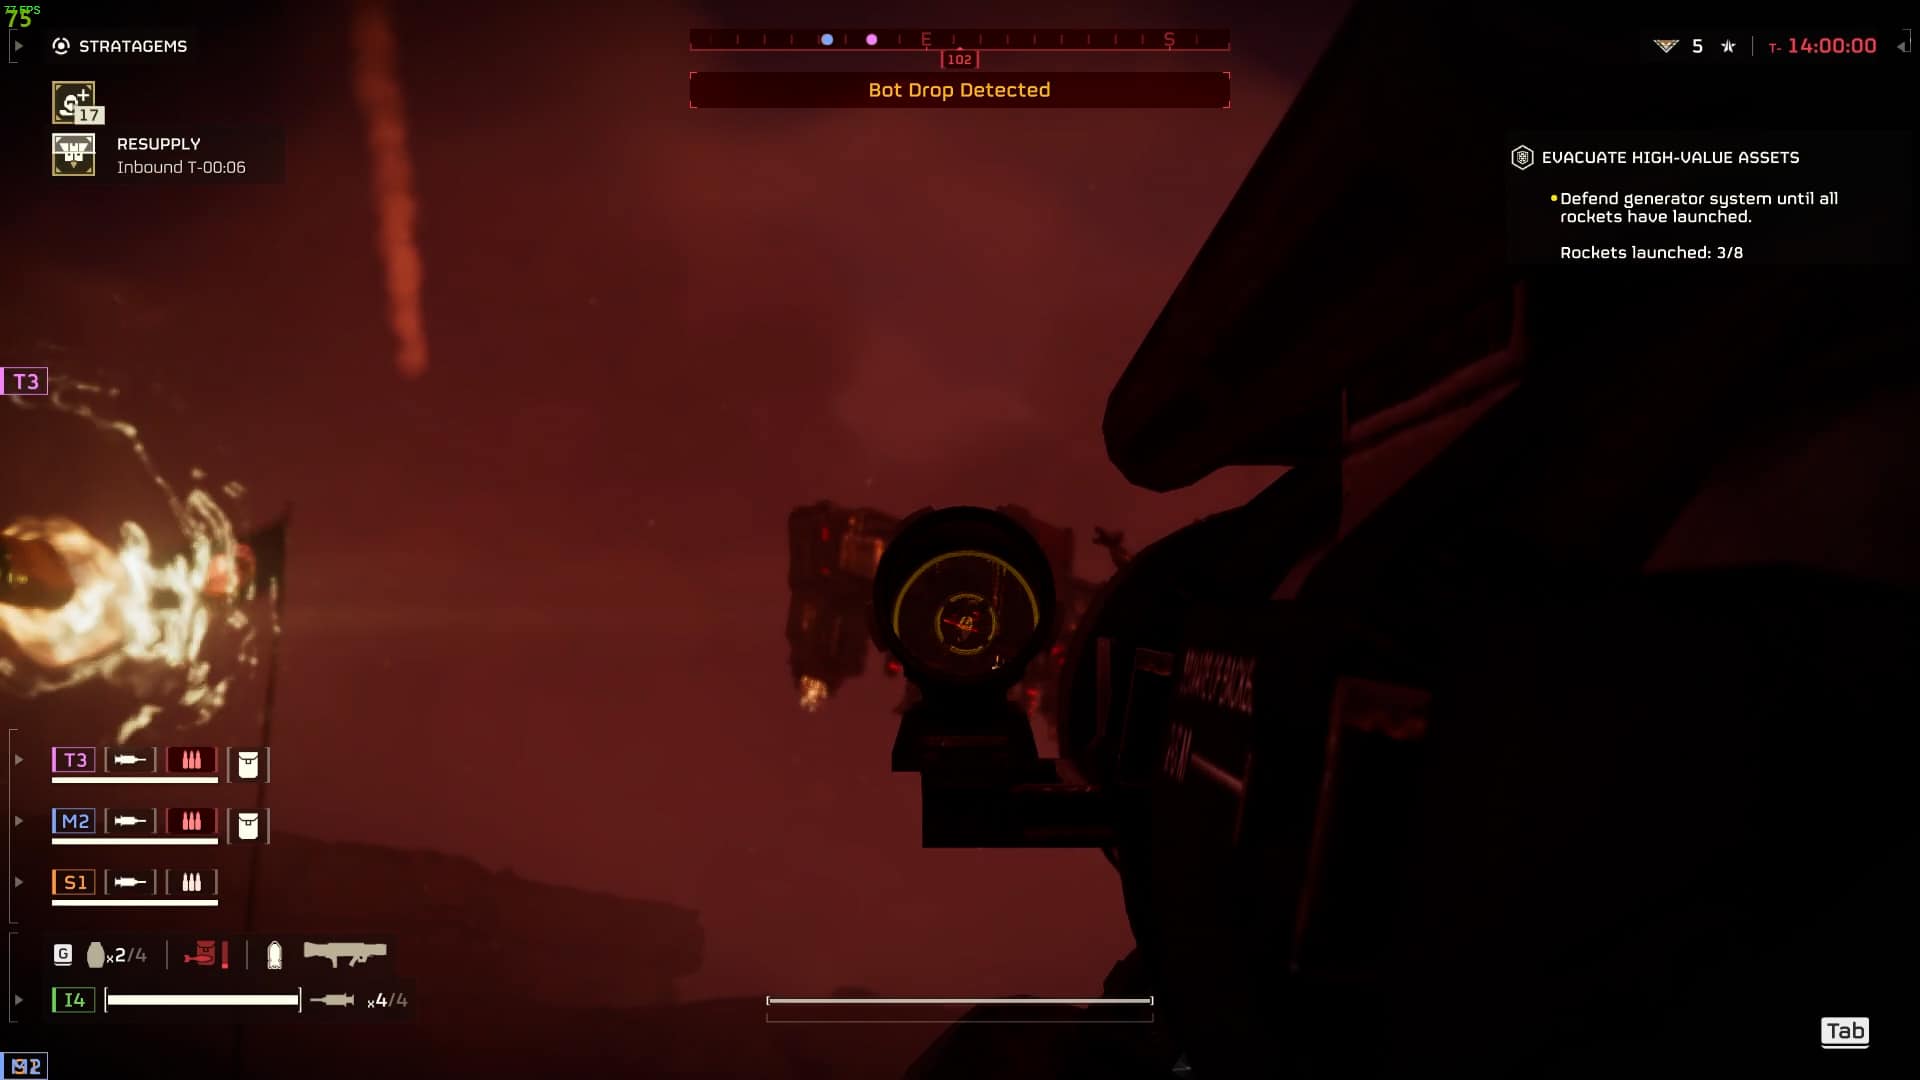 A screenshot from Helldivers 2 showing a spaceship cockpit view with warning alerts and a target locked onto an enemy ship amidst a fiery space battle.